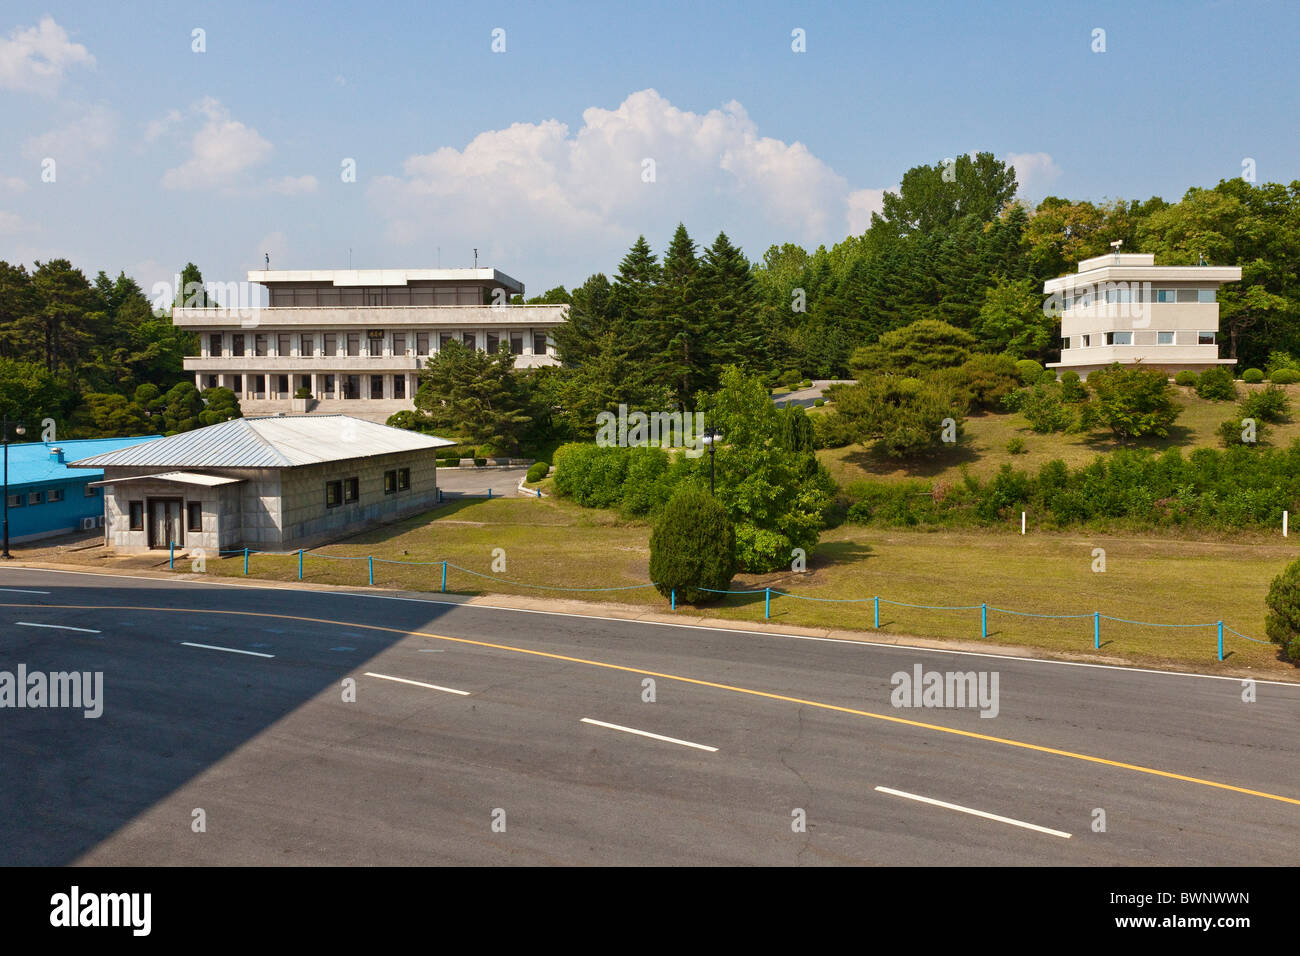 Looking over UN buildings to North Korean Panmon Hall building in JSA Joint Security Area, DMZ Demilitarized Zone. JMH3836 Stock Photo